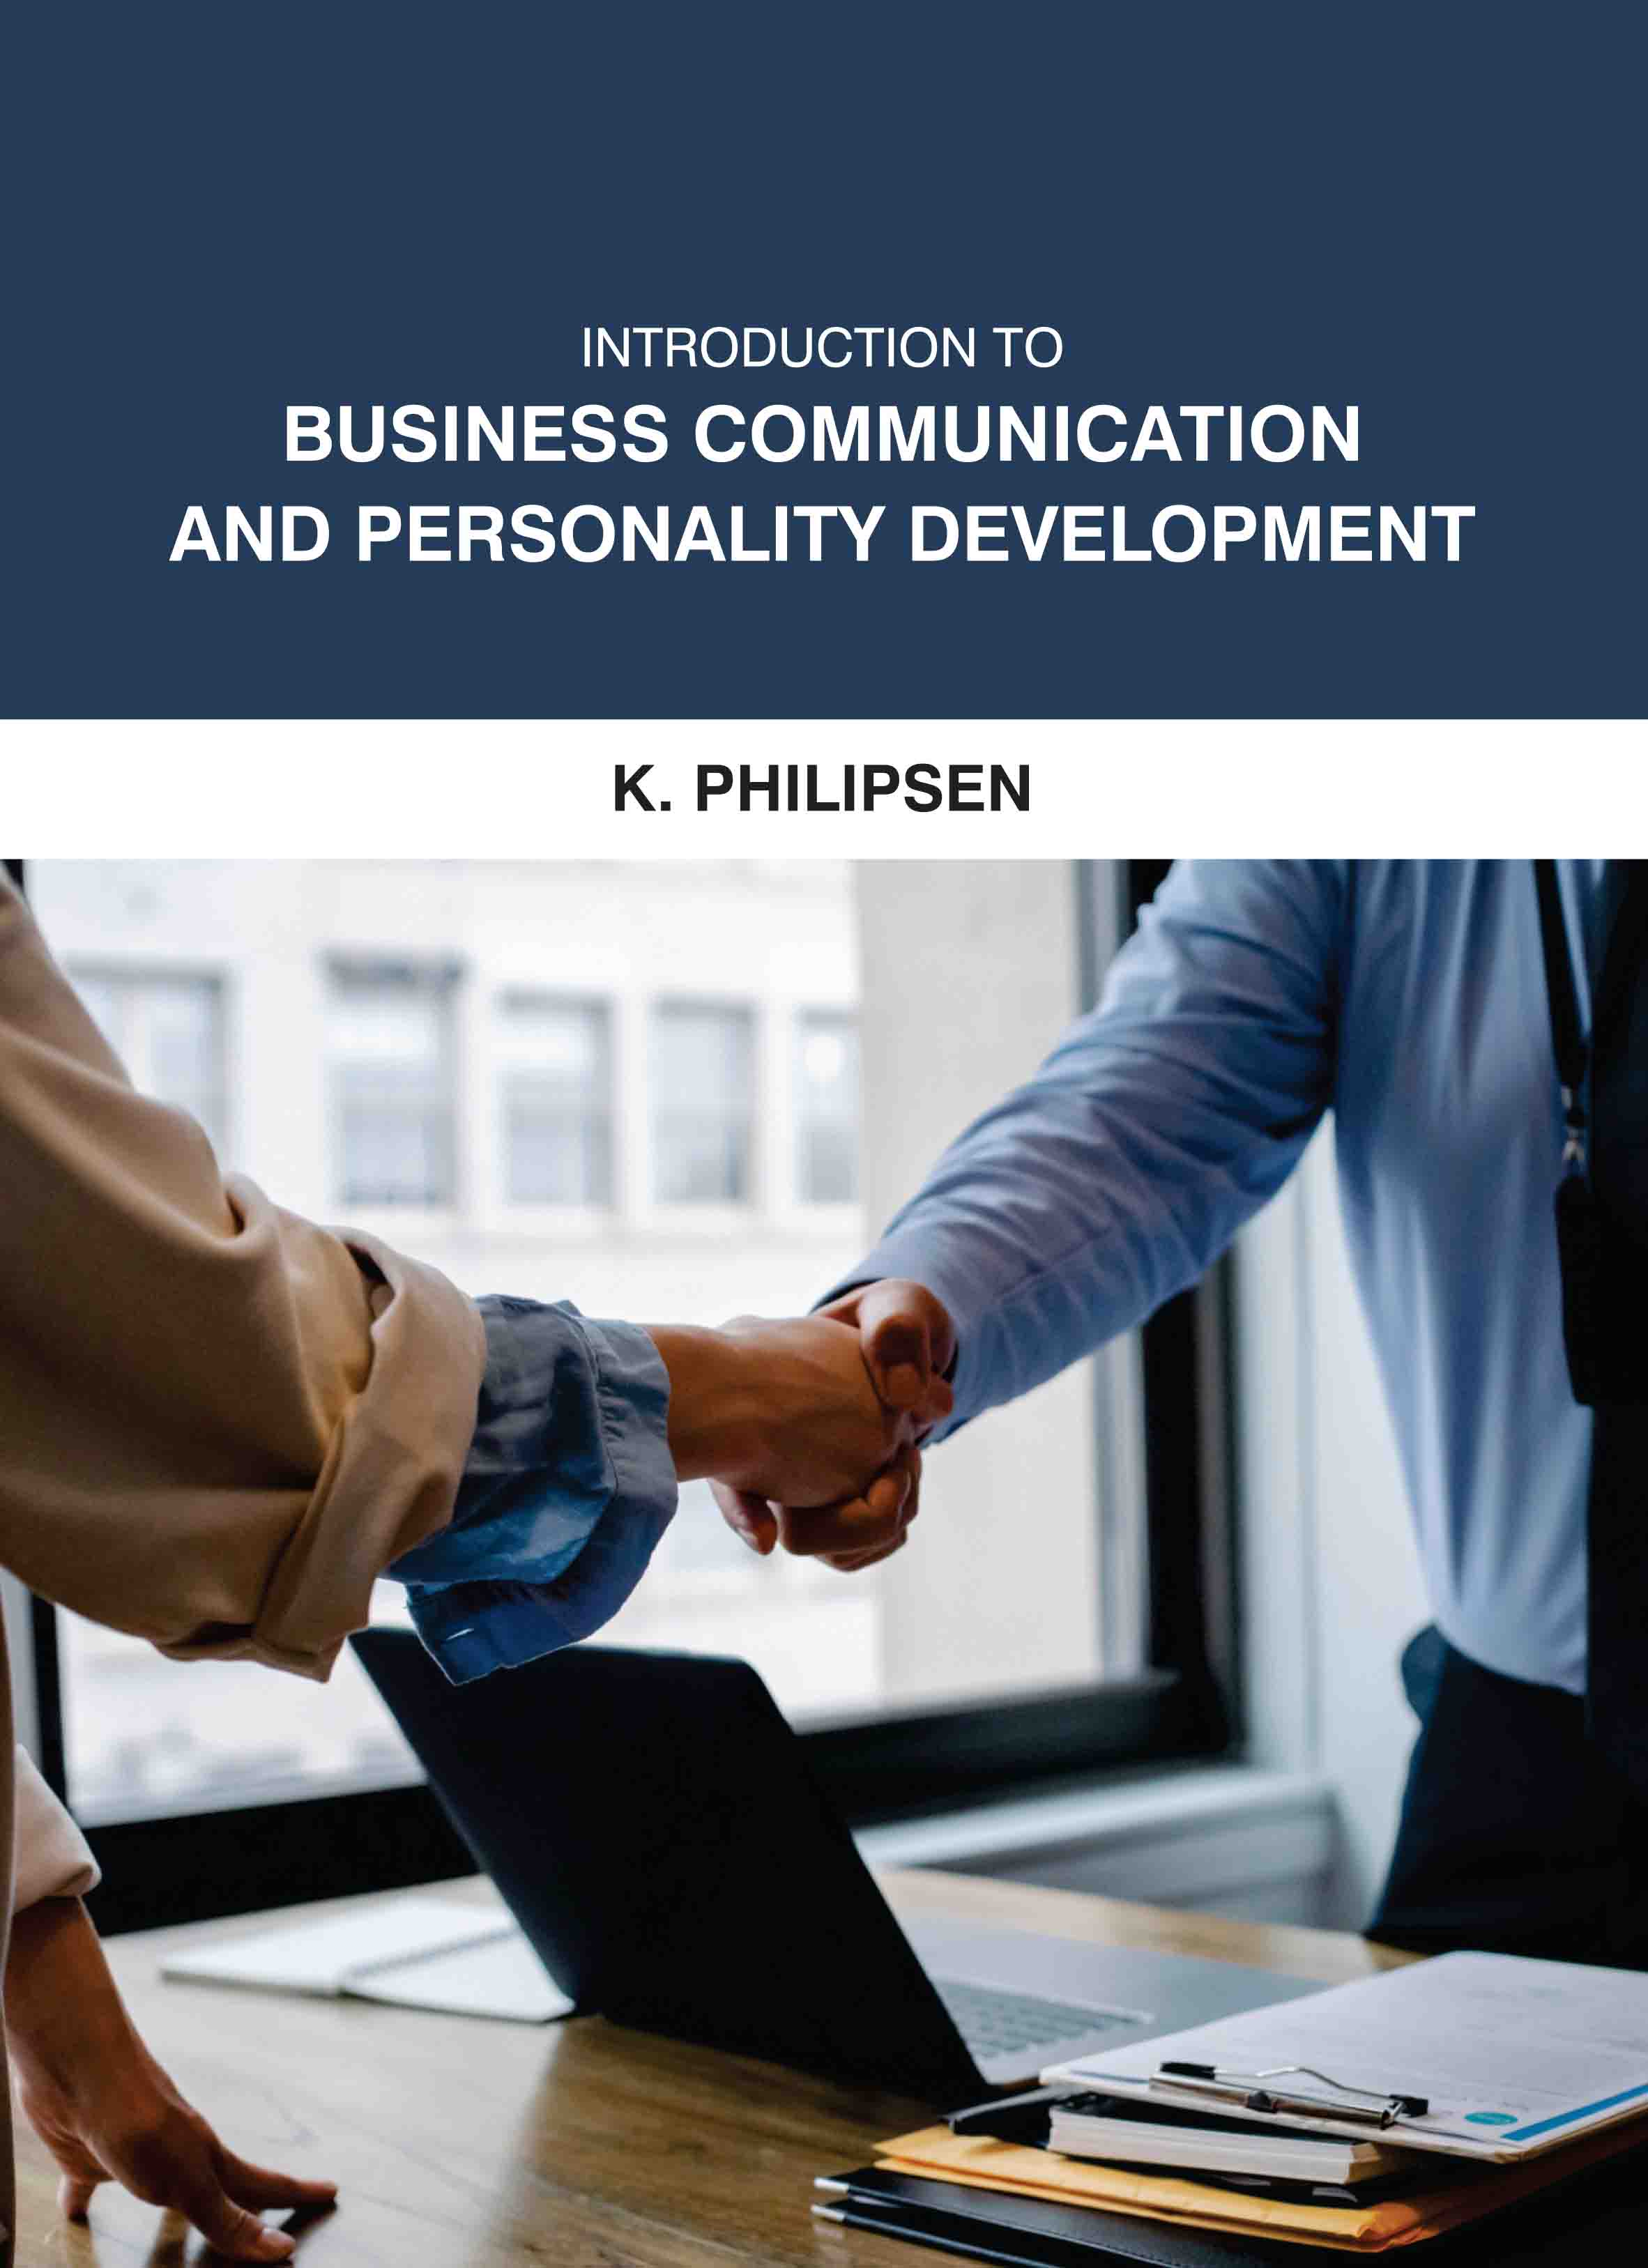 Introduction to Business Communication and Personality Development